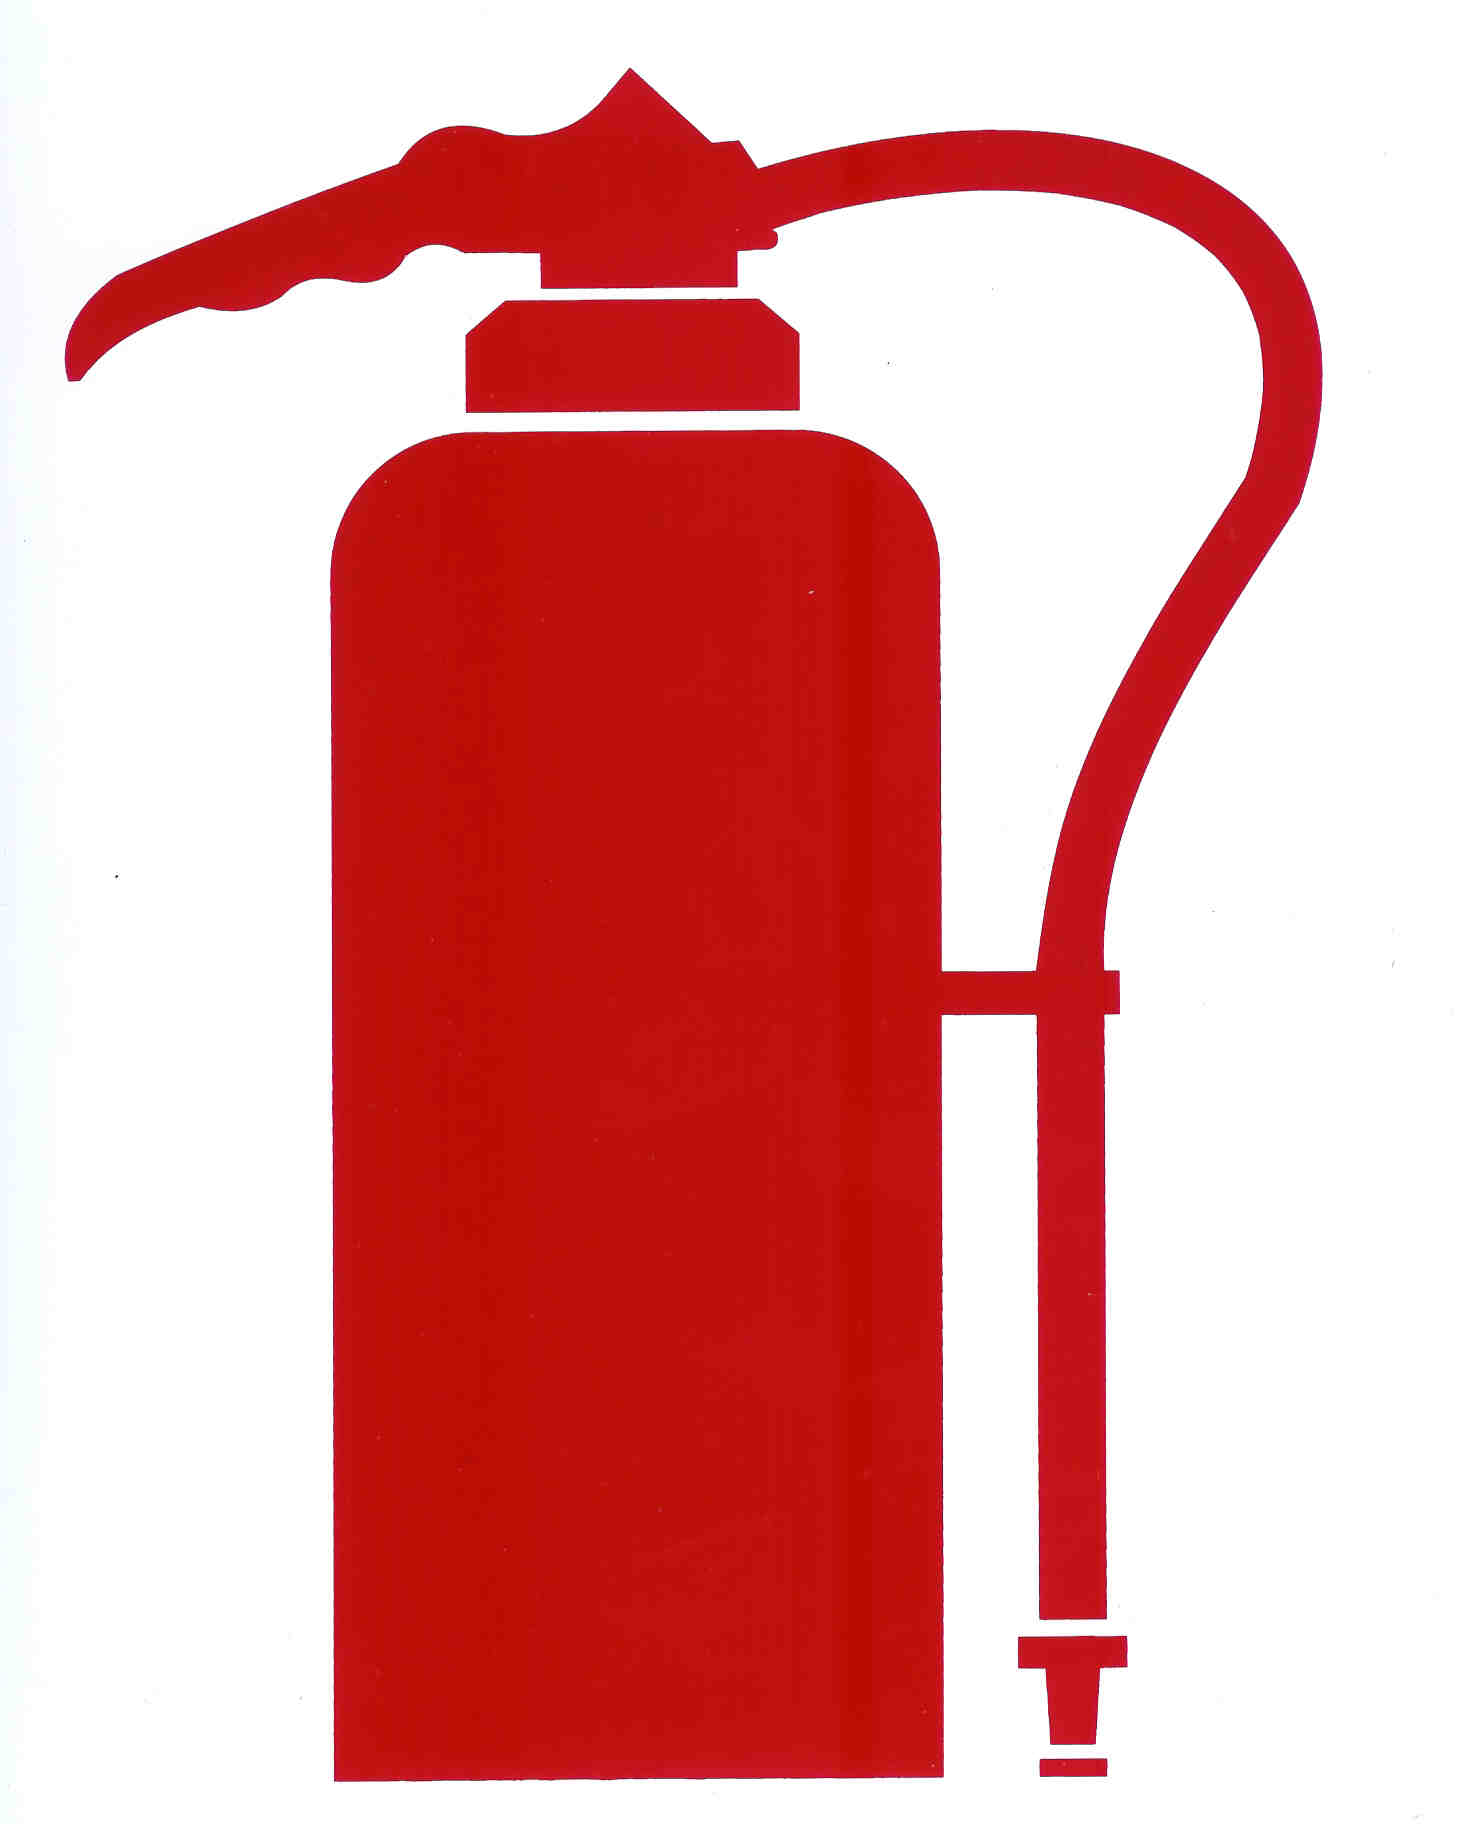 Fire Extinguisher Images . Fi - Fire Extinguisher Clip Art